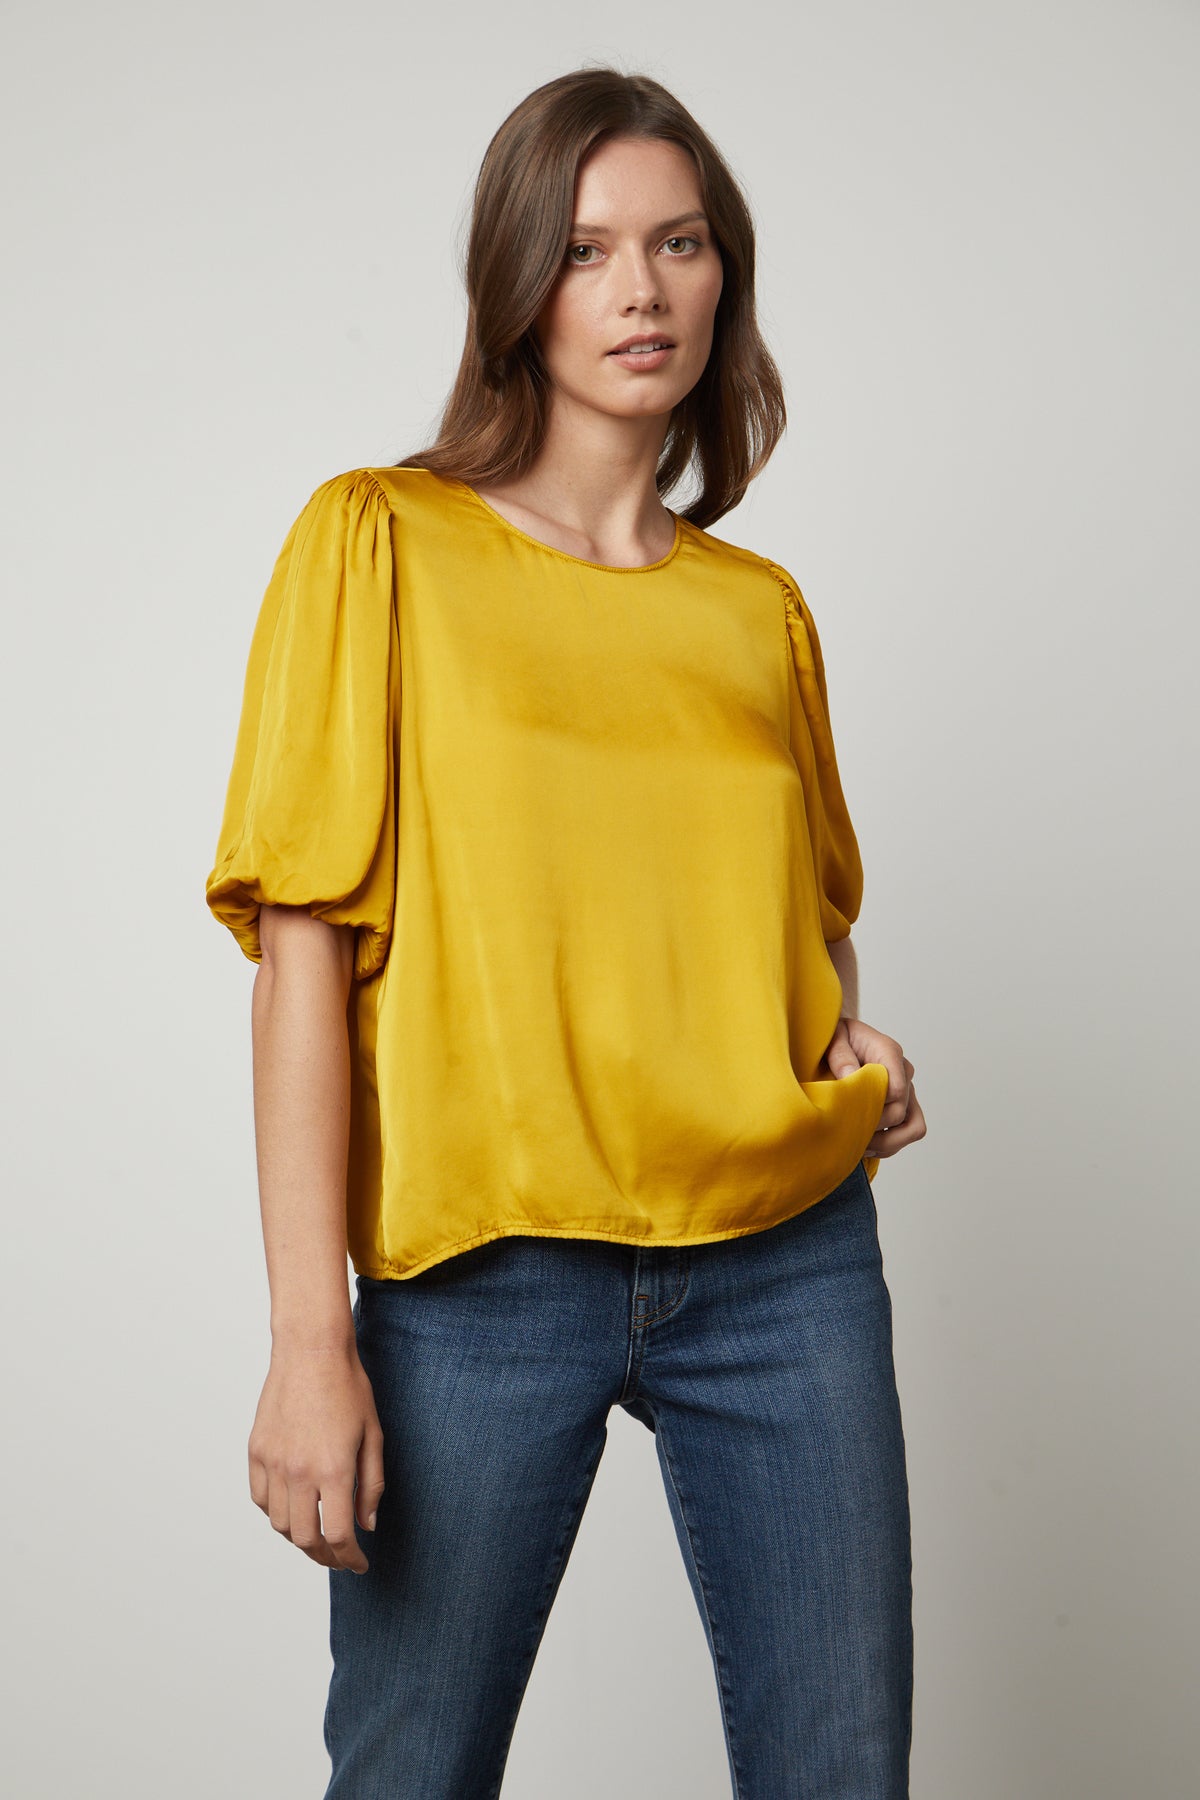   The model is wearing a yellow DESI SATIN PUFF SLEEVE TOP by Velvet by Graham & Spencer. 